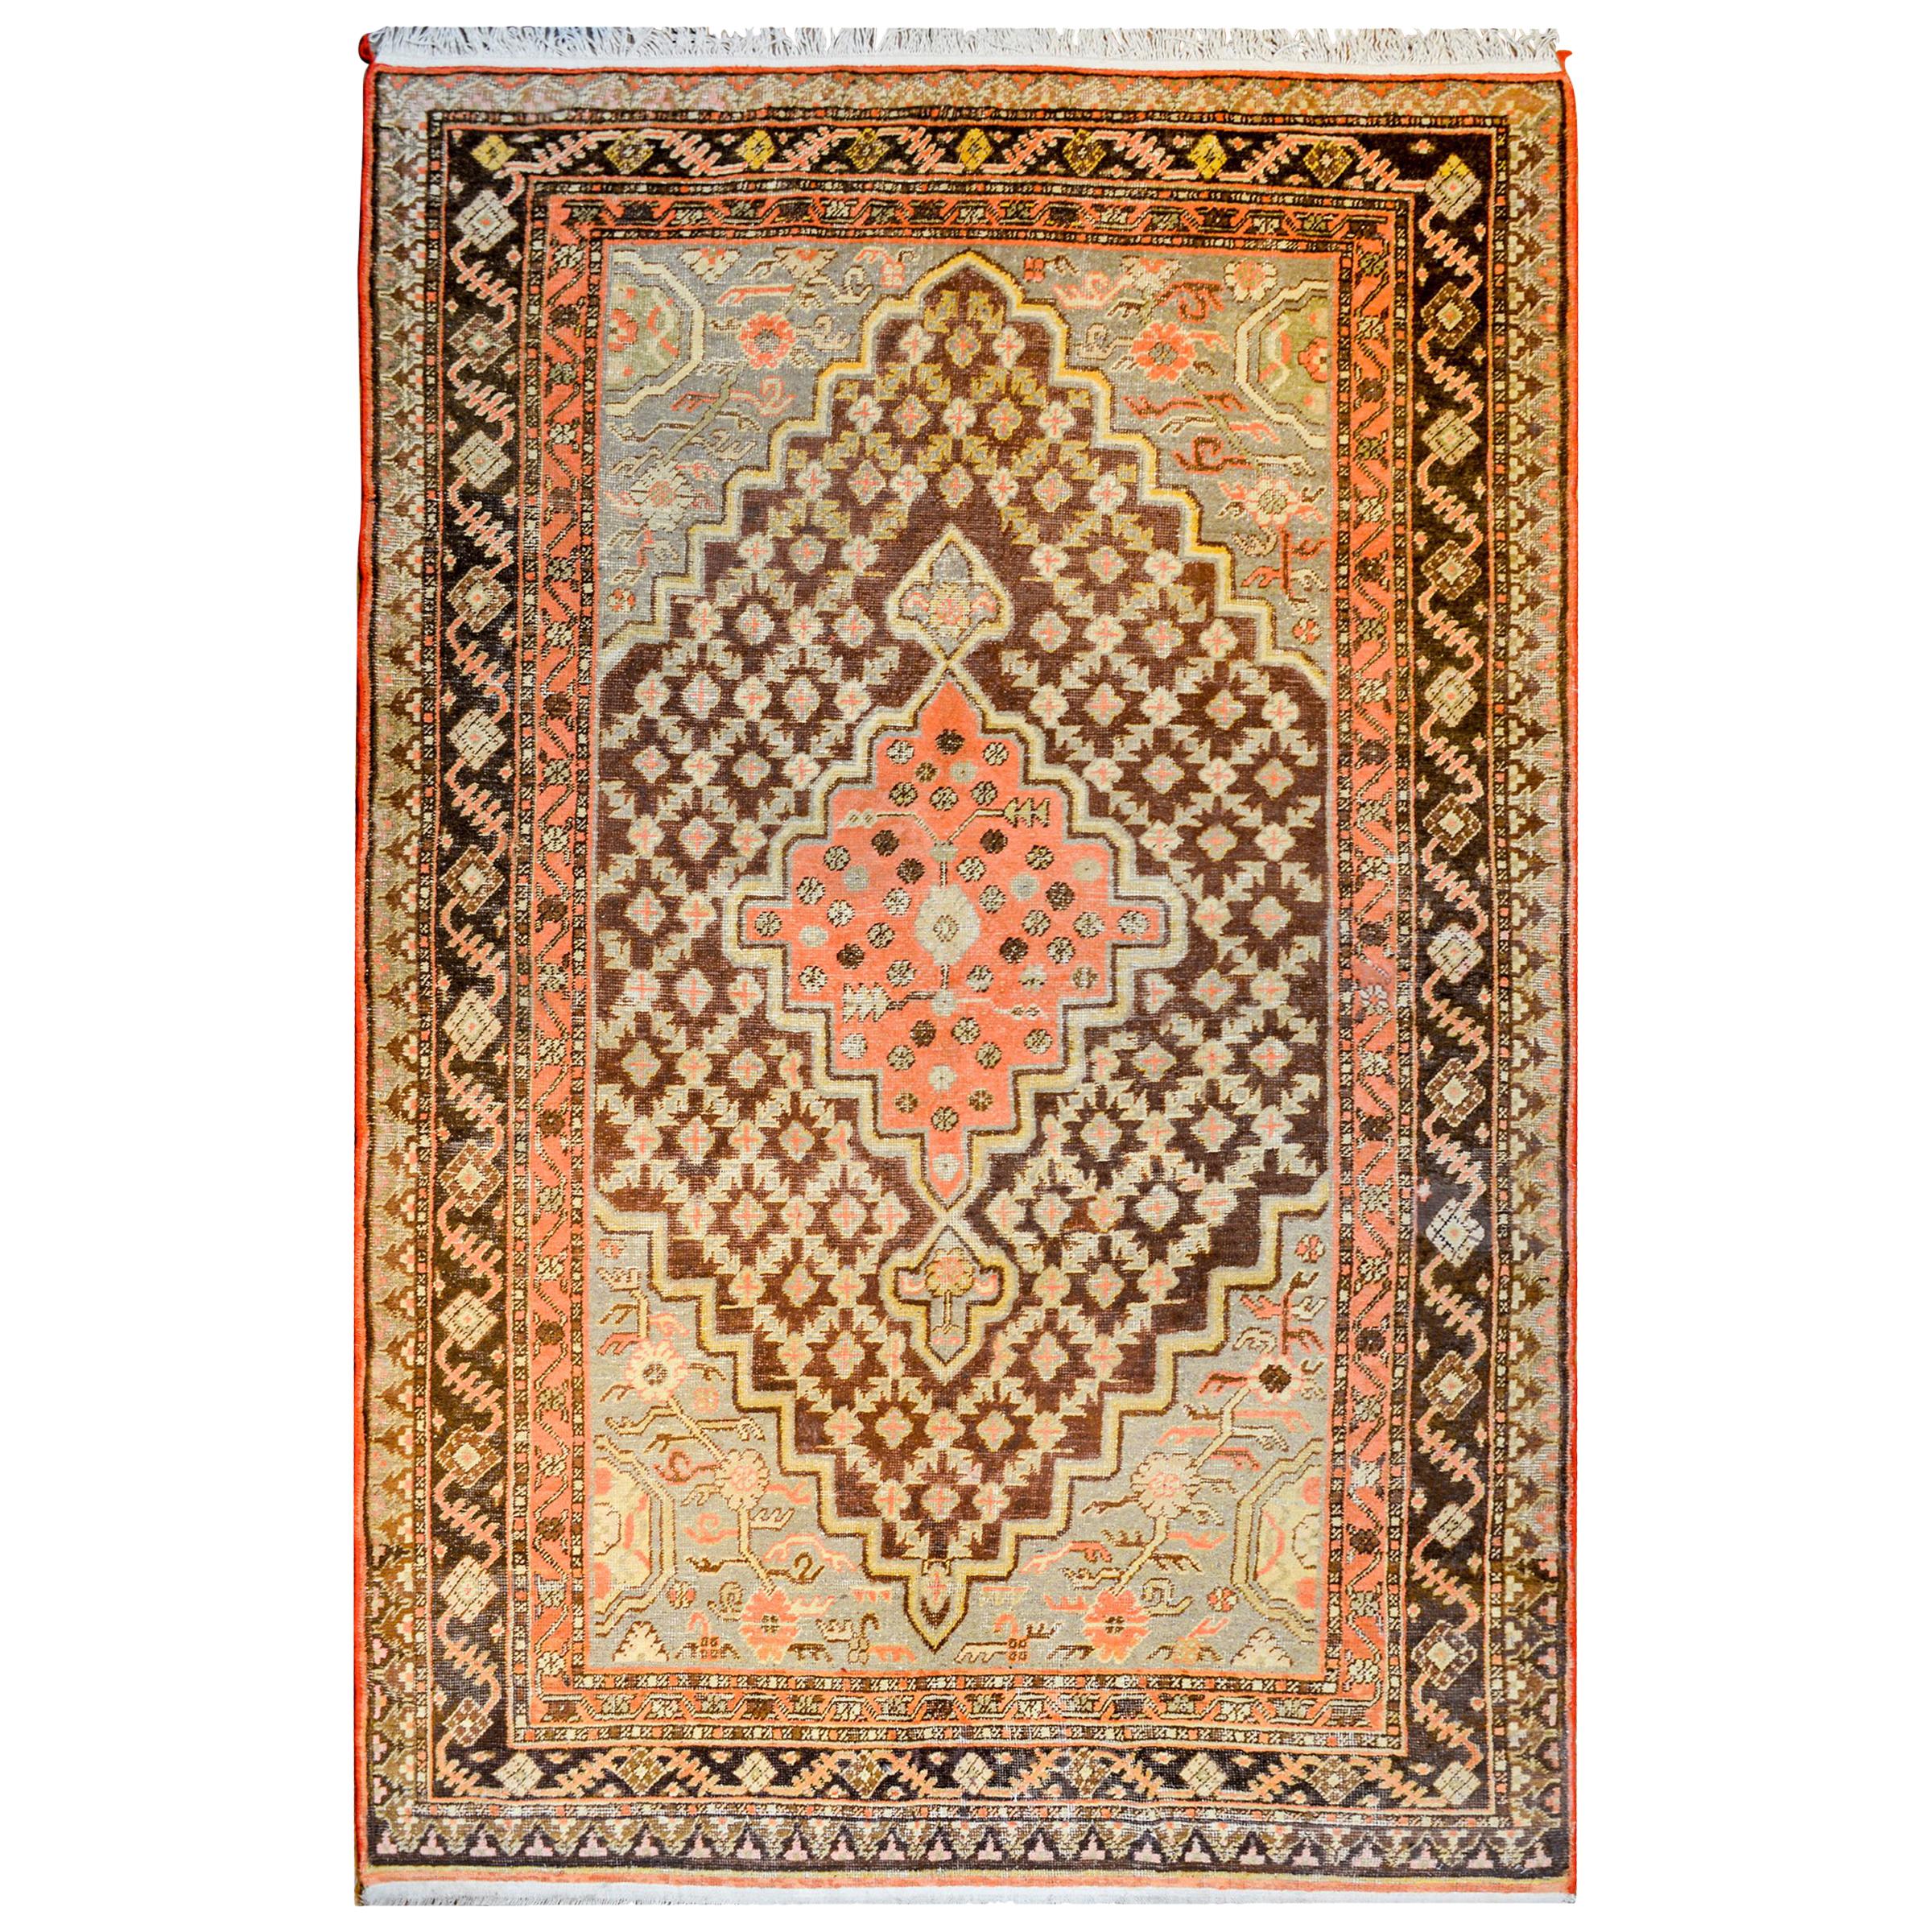 Early 20th Century Central Asian Samarghand Rug For Sale